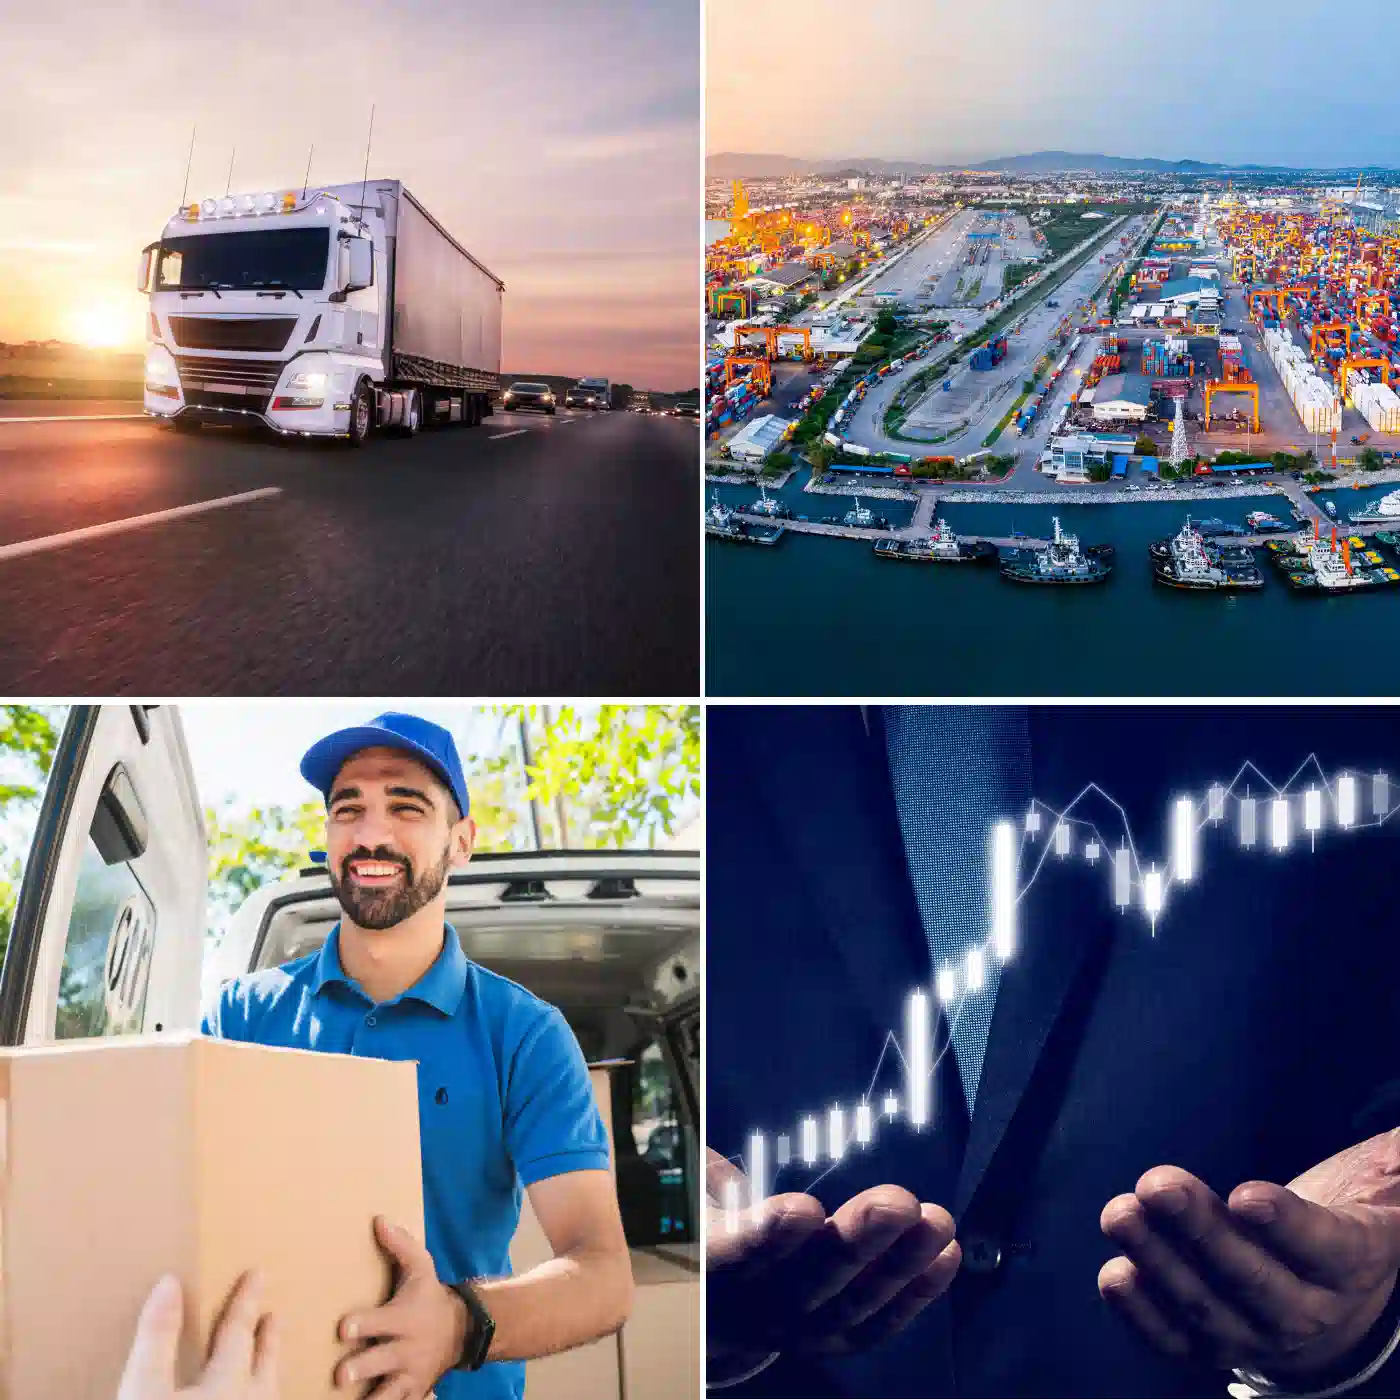 Image of 1. a truck 2. port 3. a package being delivered 4. hands holding trade time series